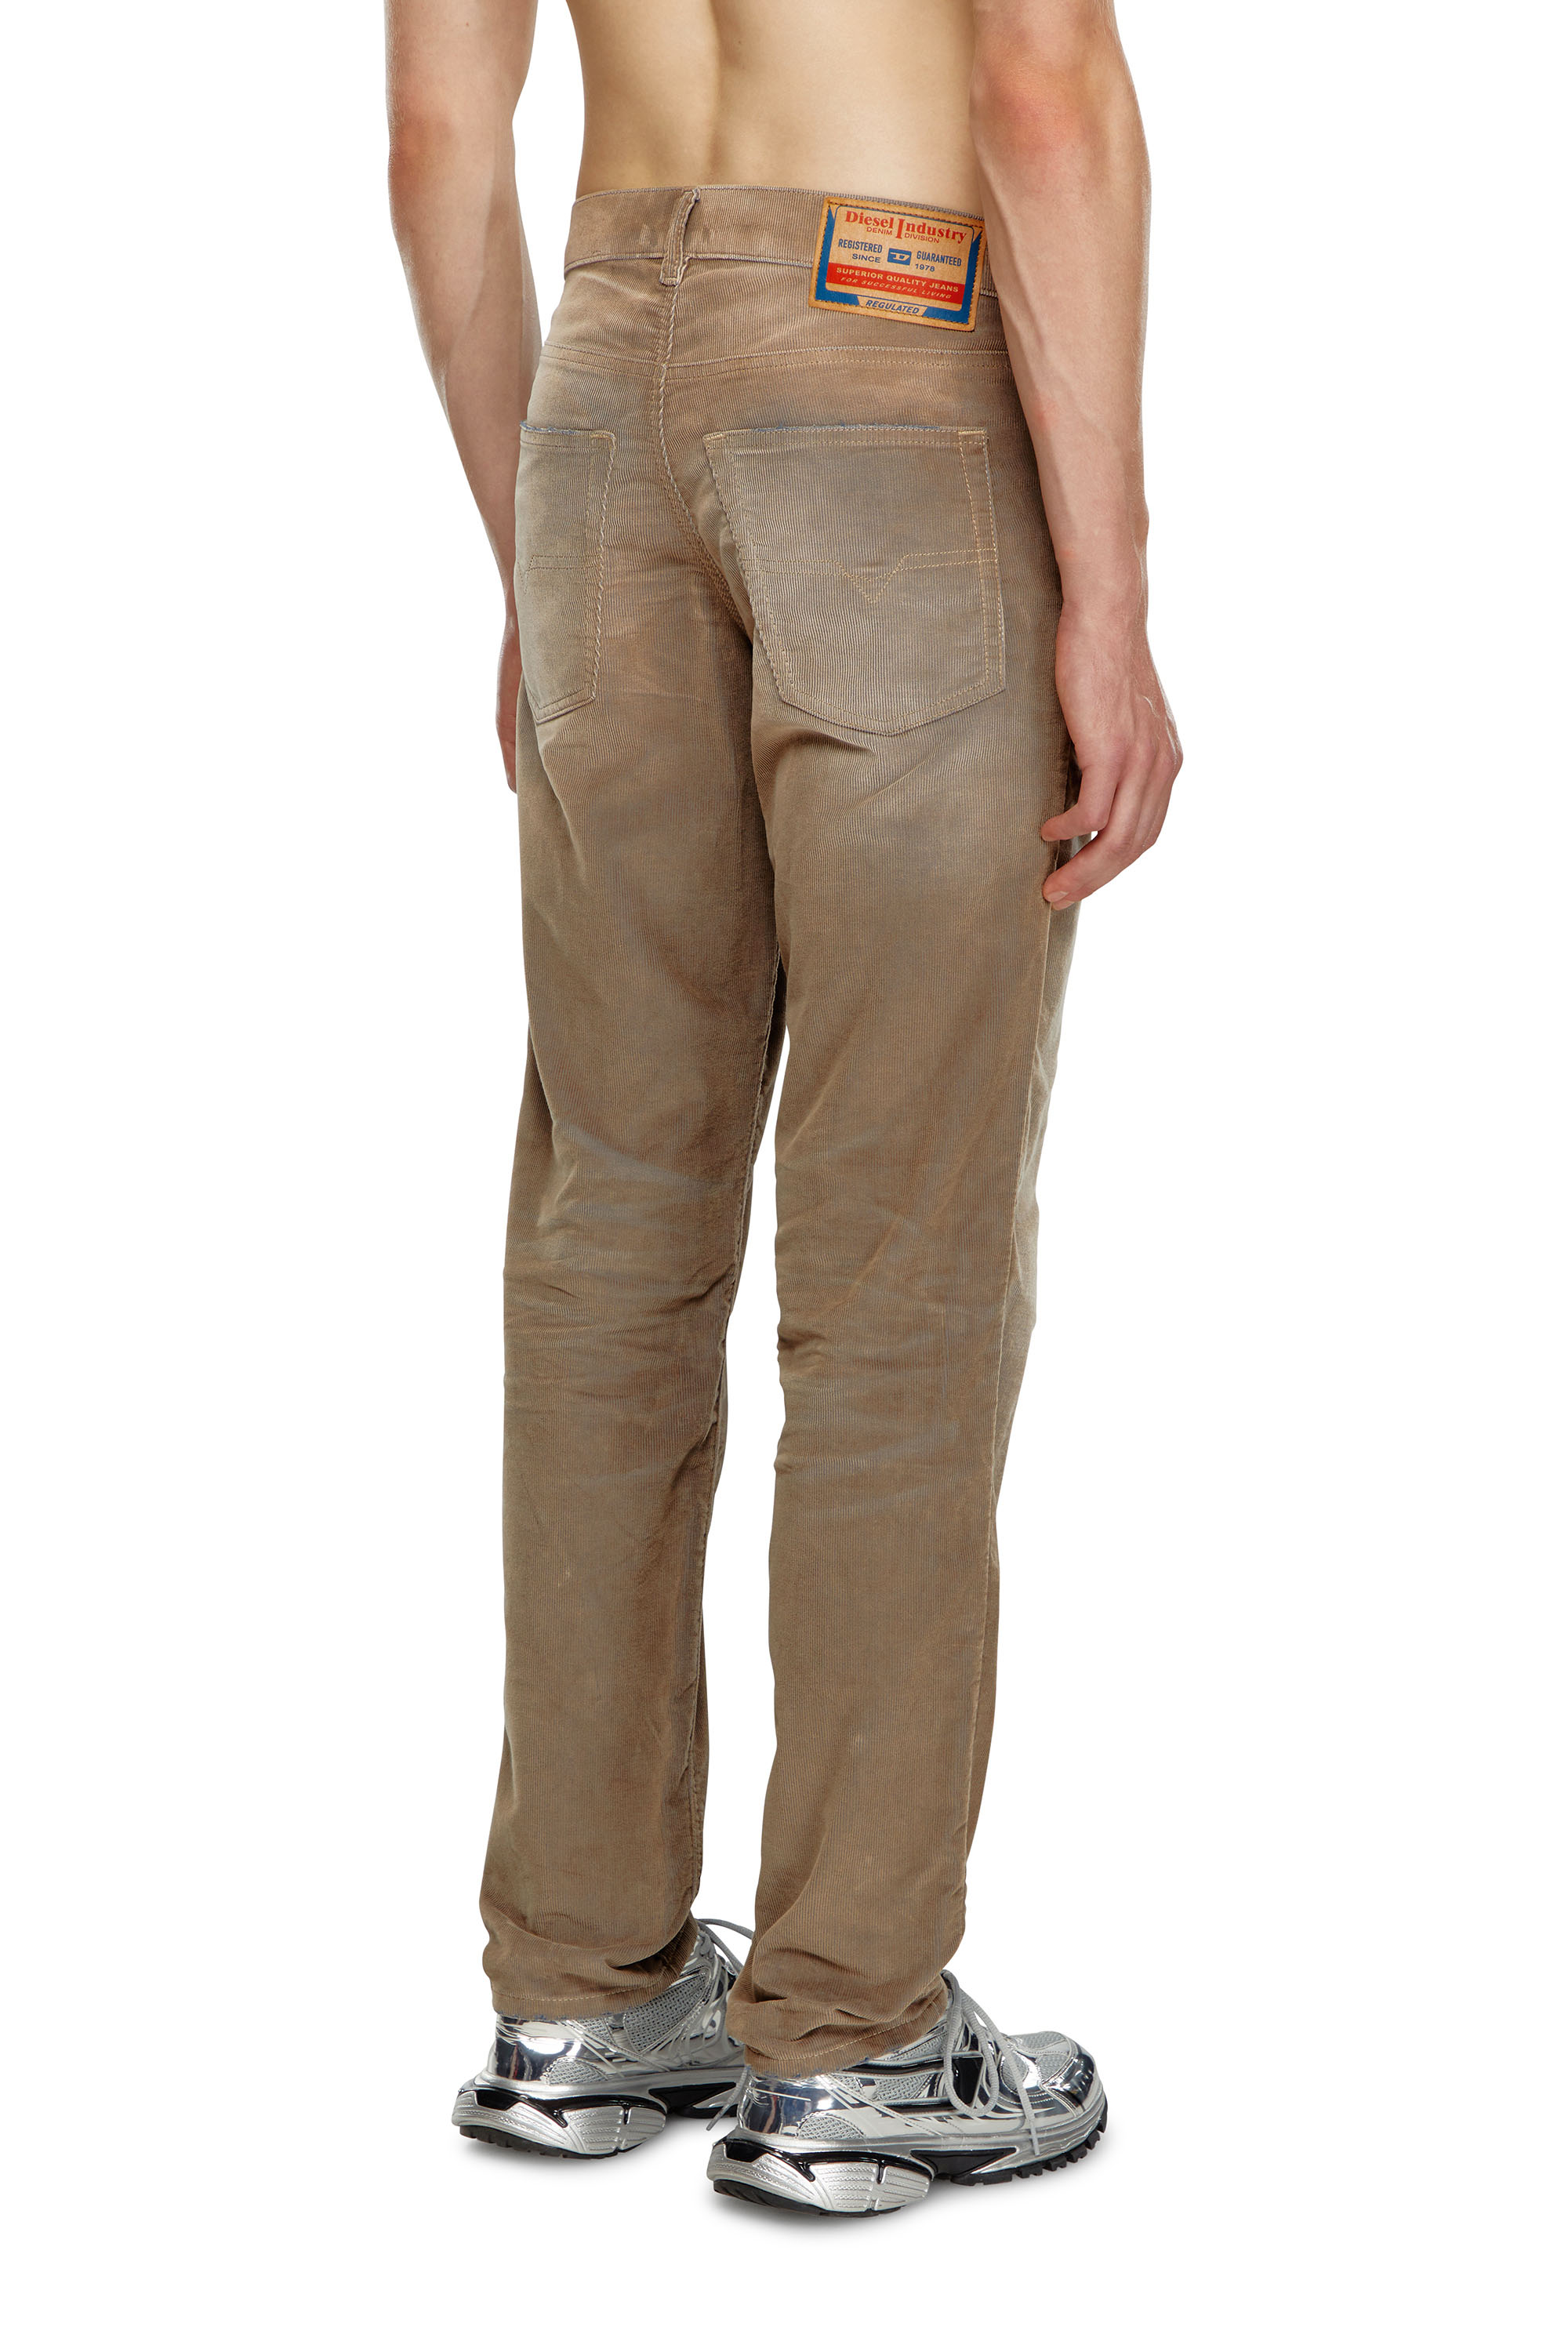 Diesel - Tapered Jeans 2023 D-Finitive 003II, Hombre Tapered Jeans - 2023 D-Finitive in Gris - Image 4